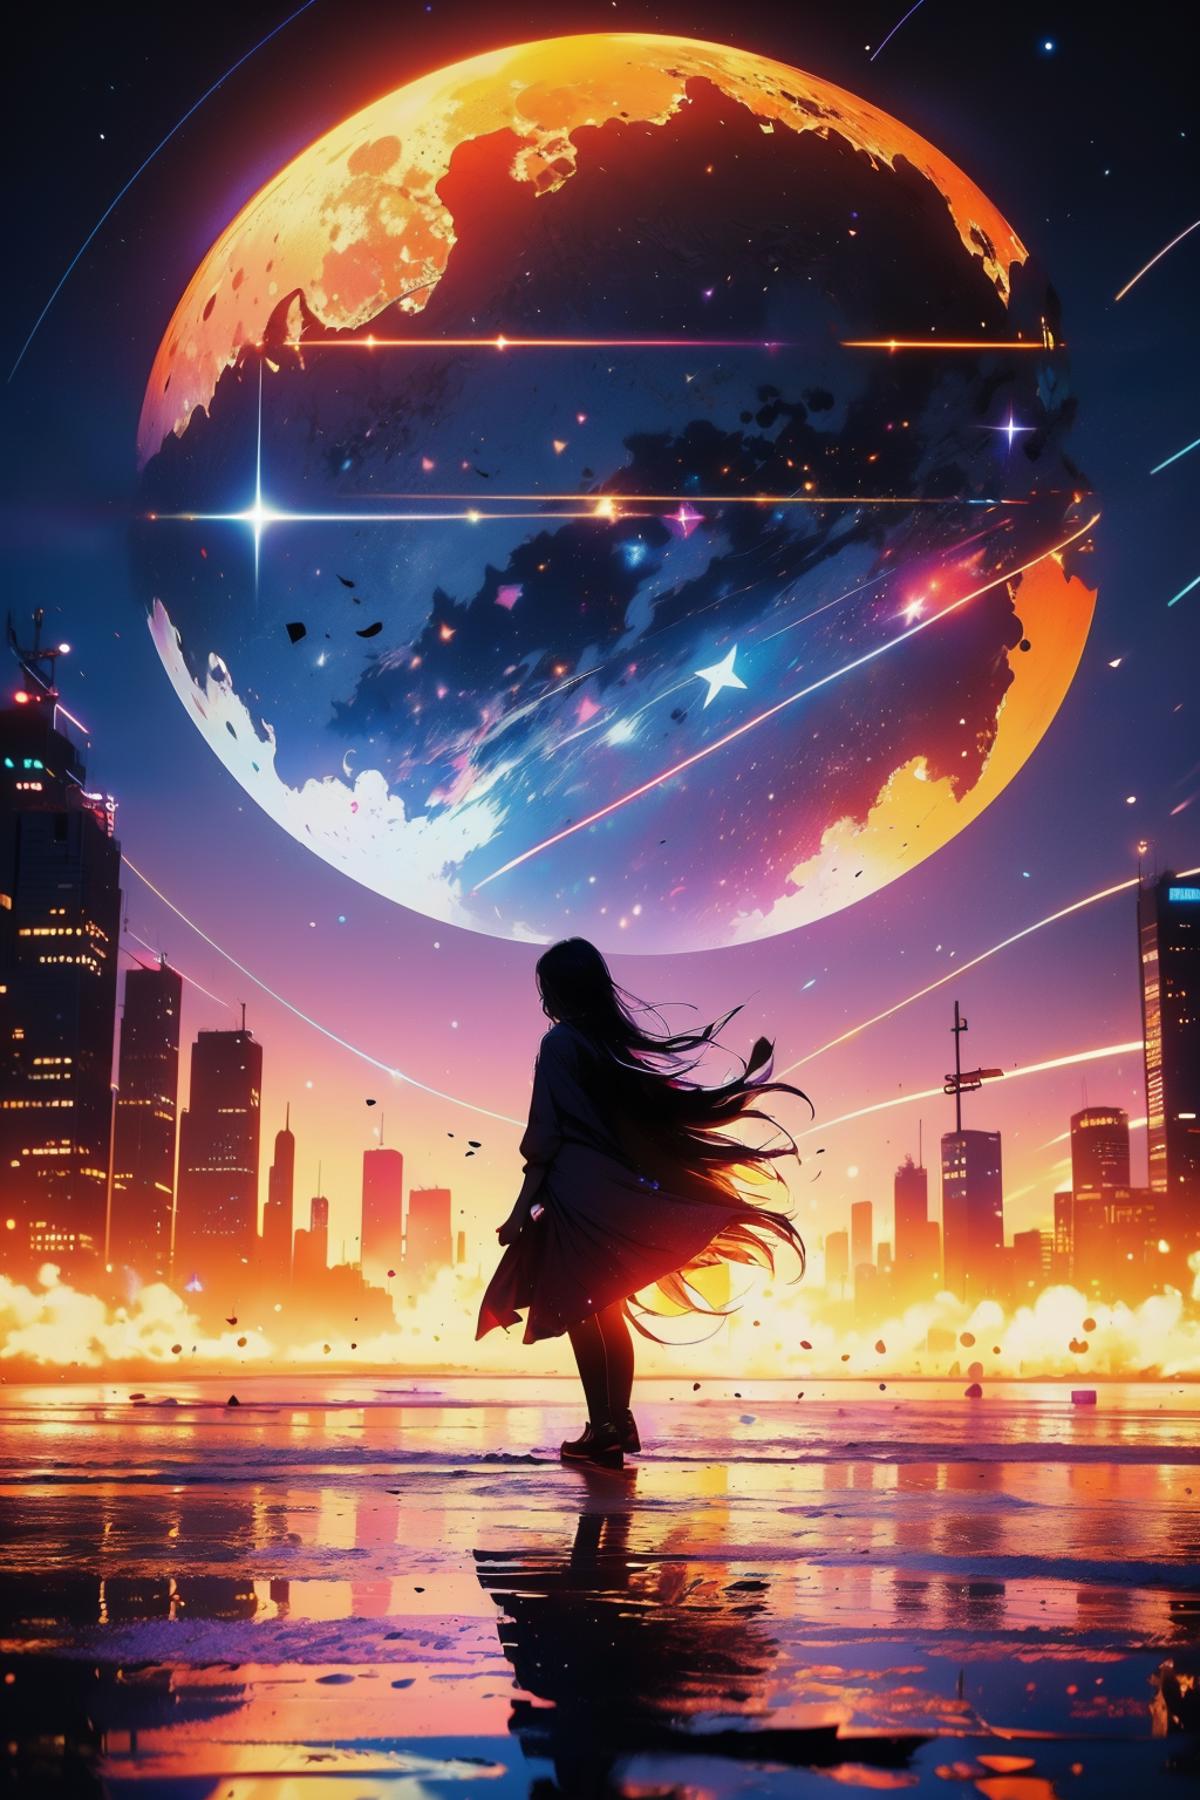 A woman with long hair standing in front of a city and a moon with a meteor shower.